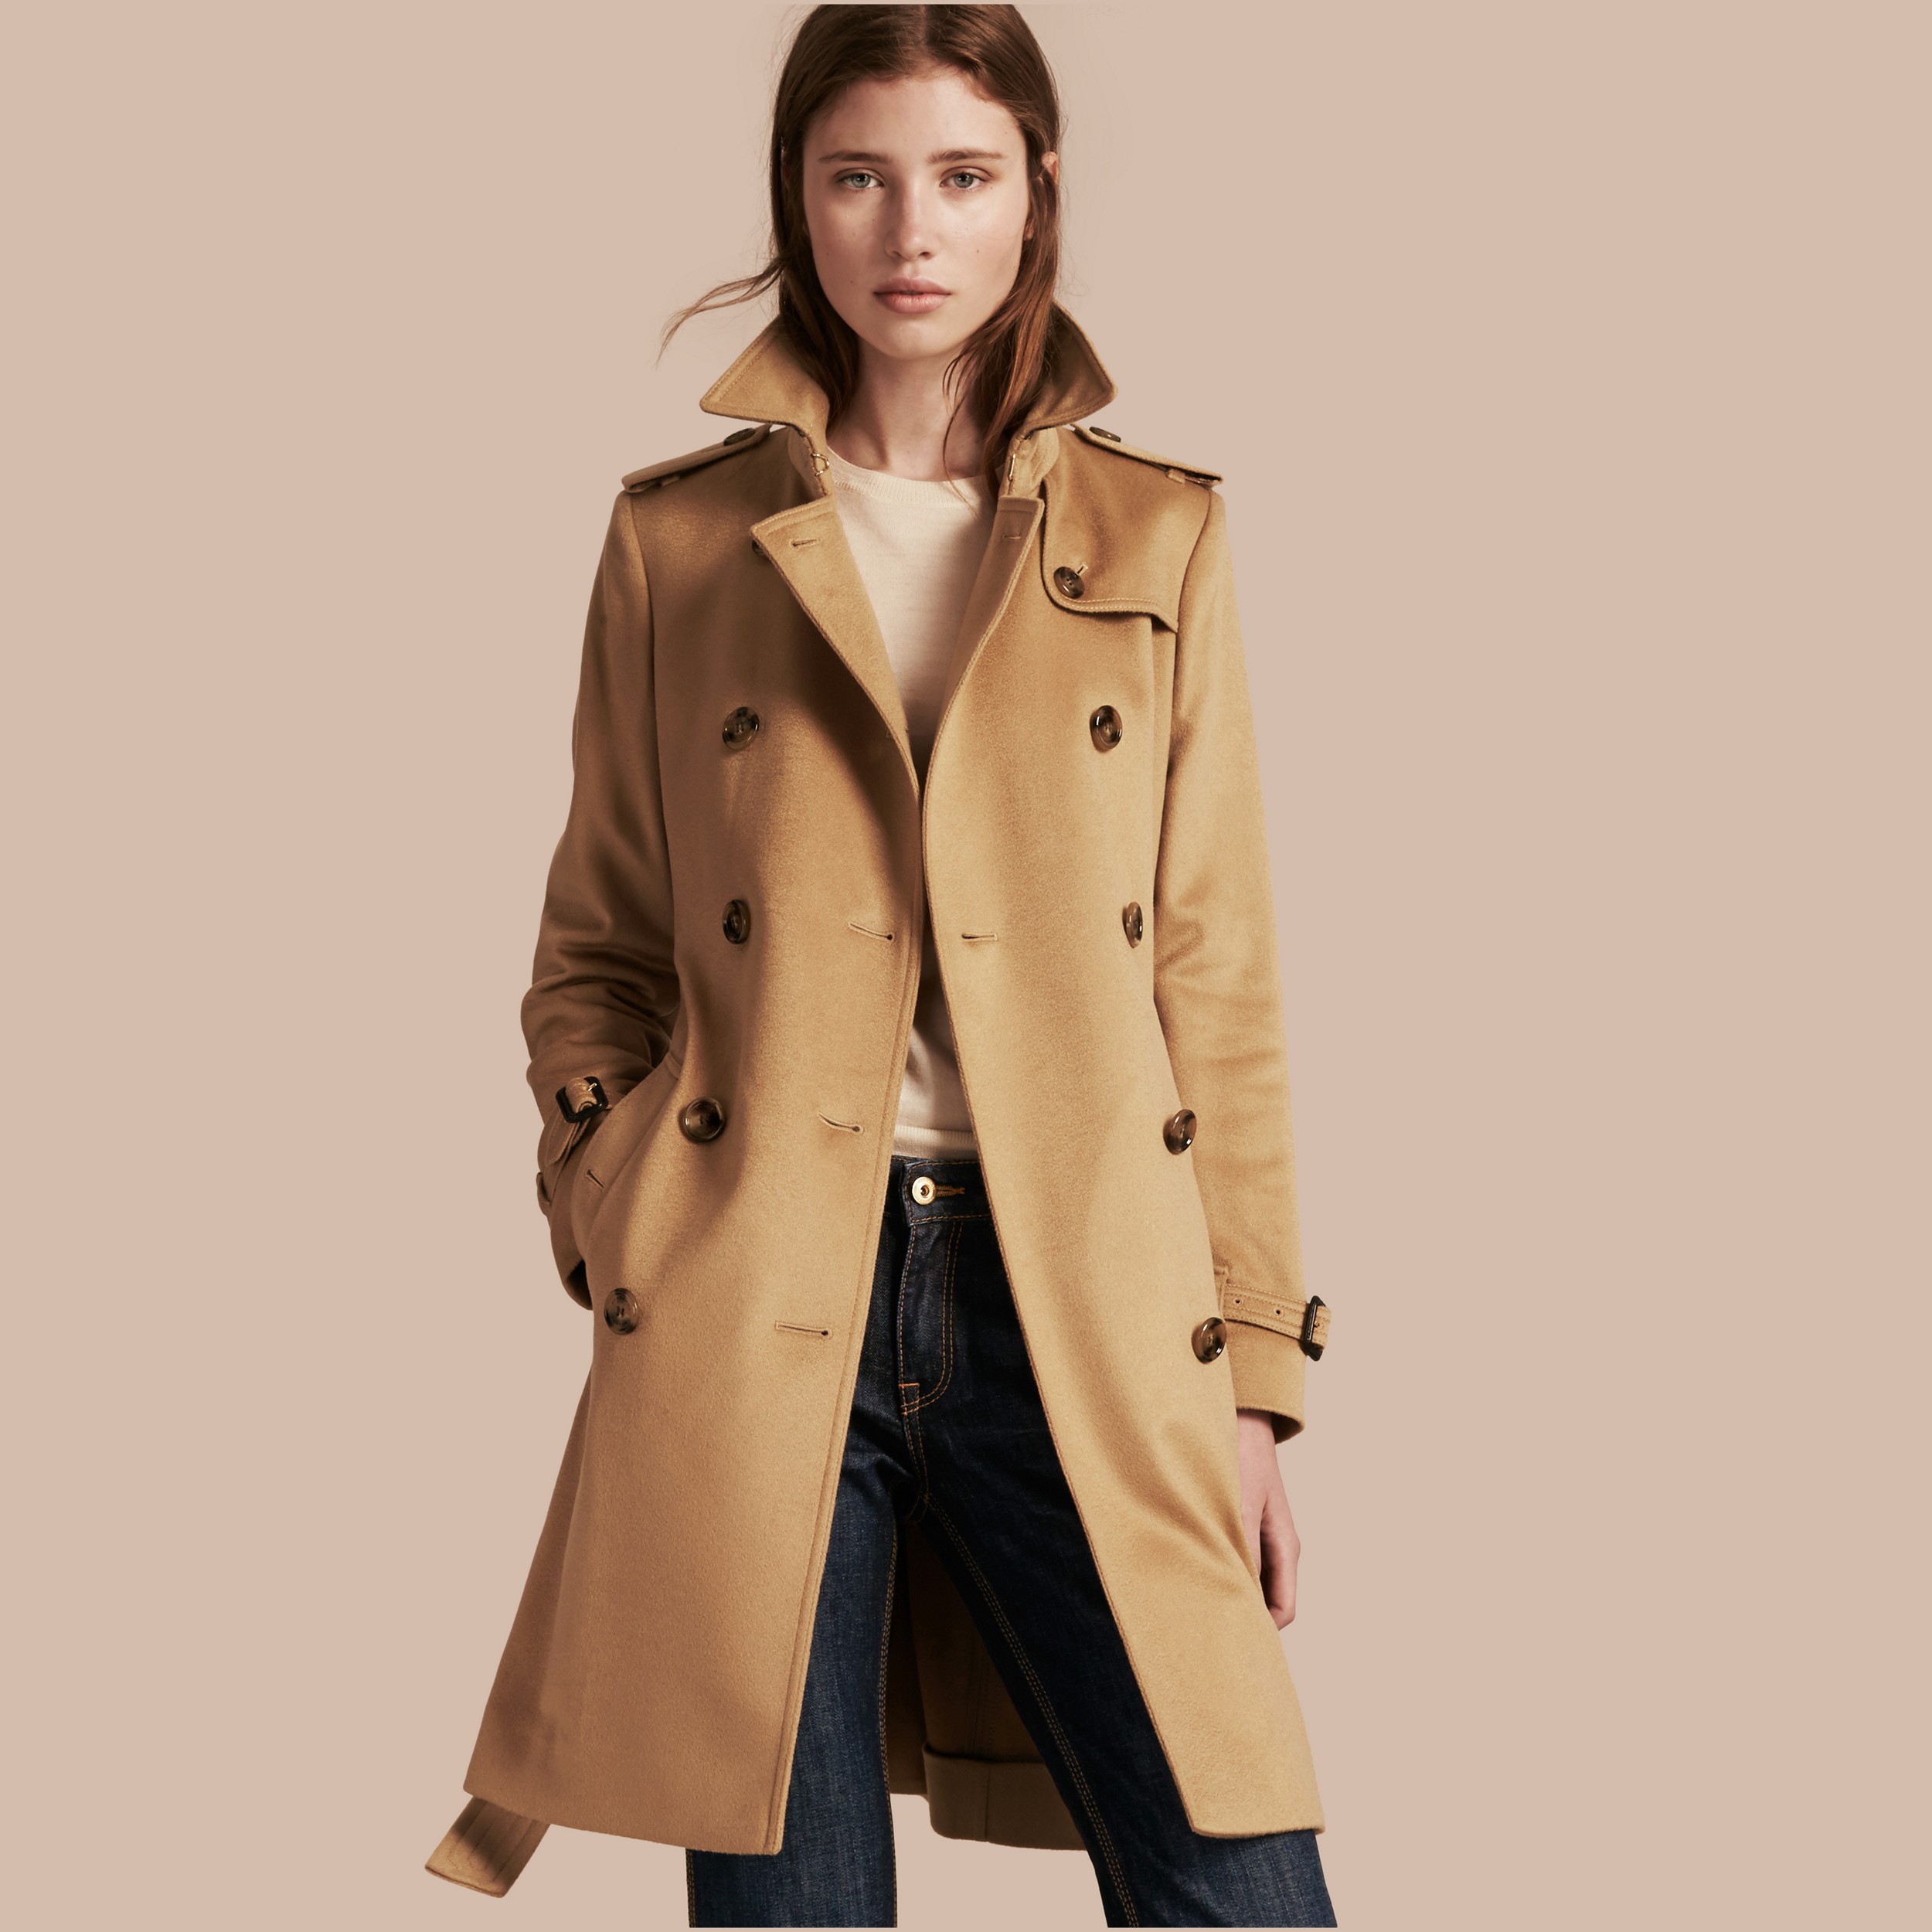 Kensington Fit Cashmere Trench Coat in Camel - Women | Burberry